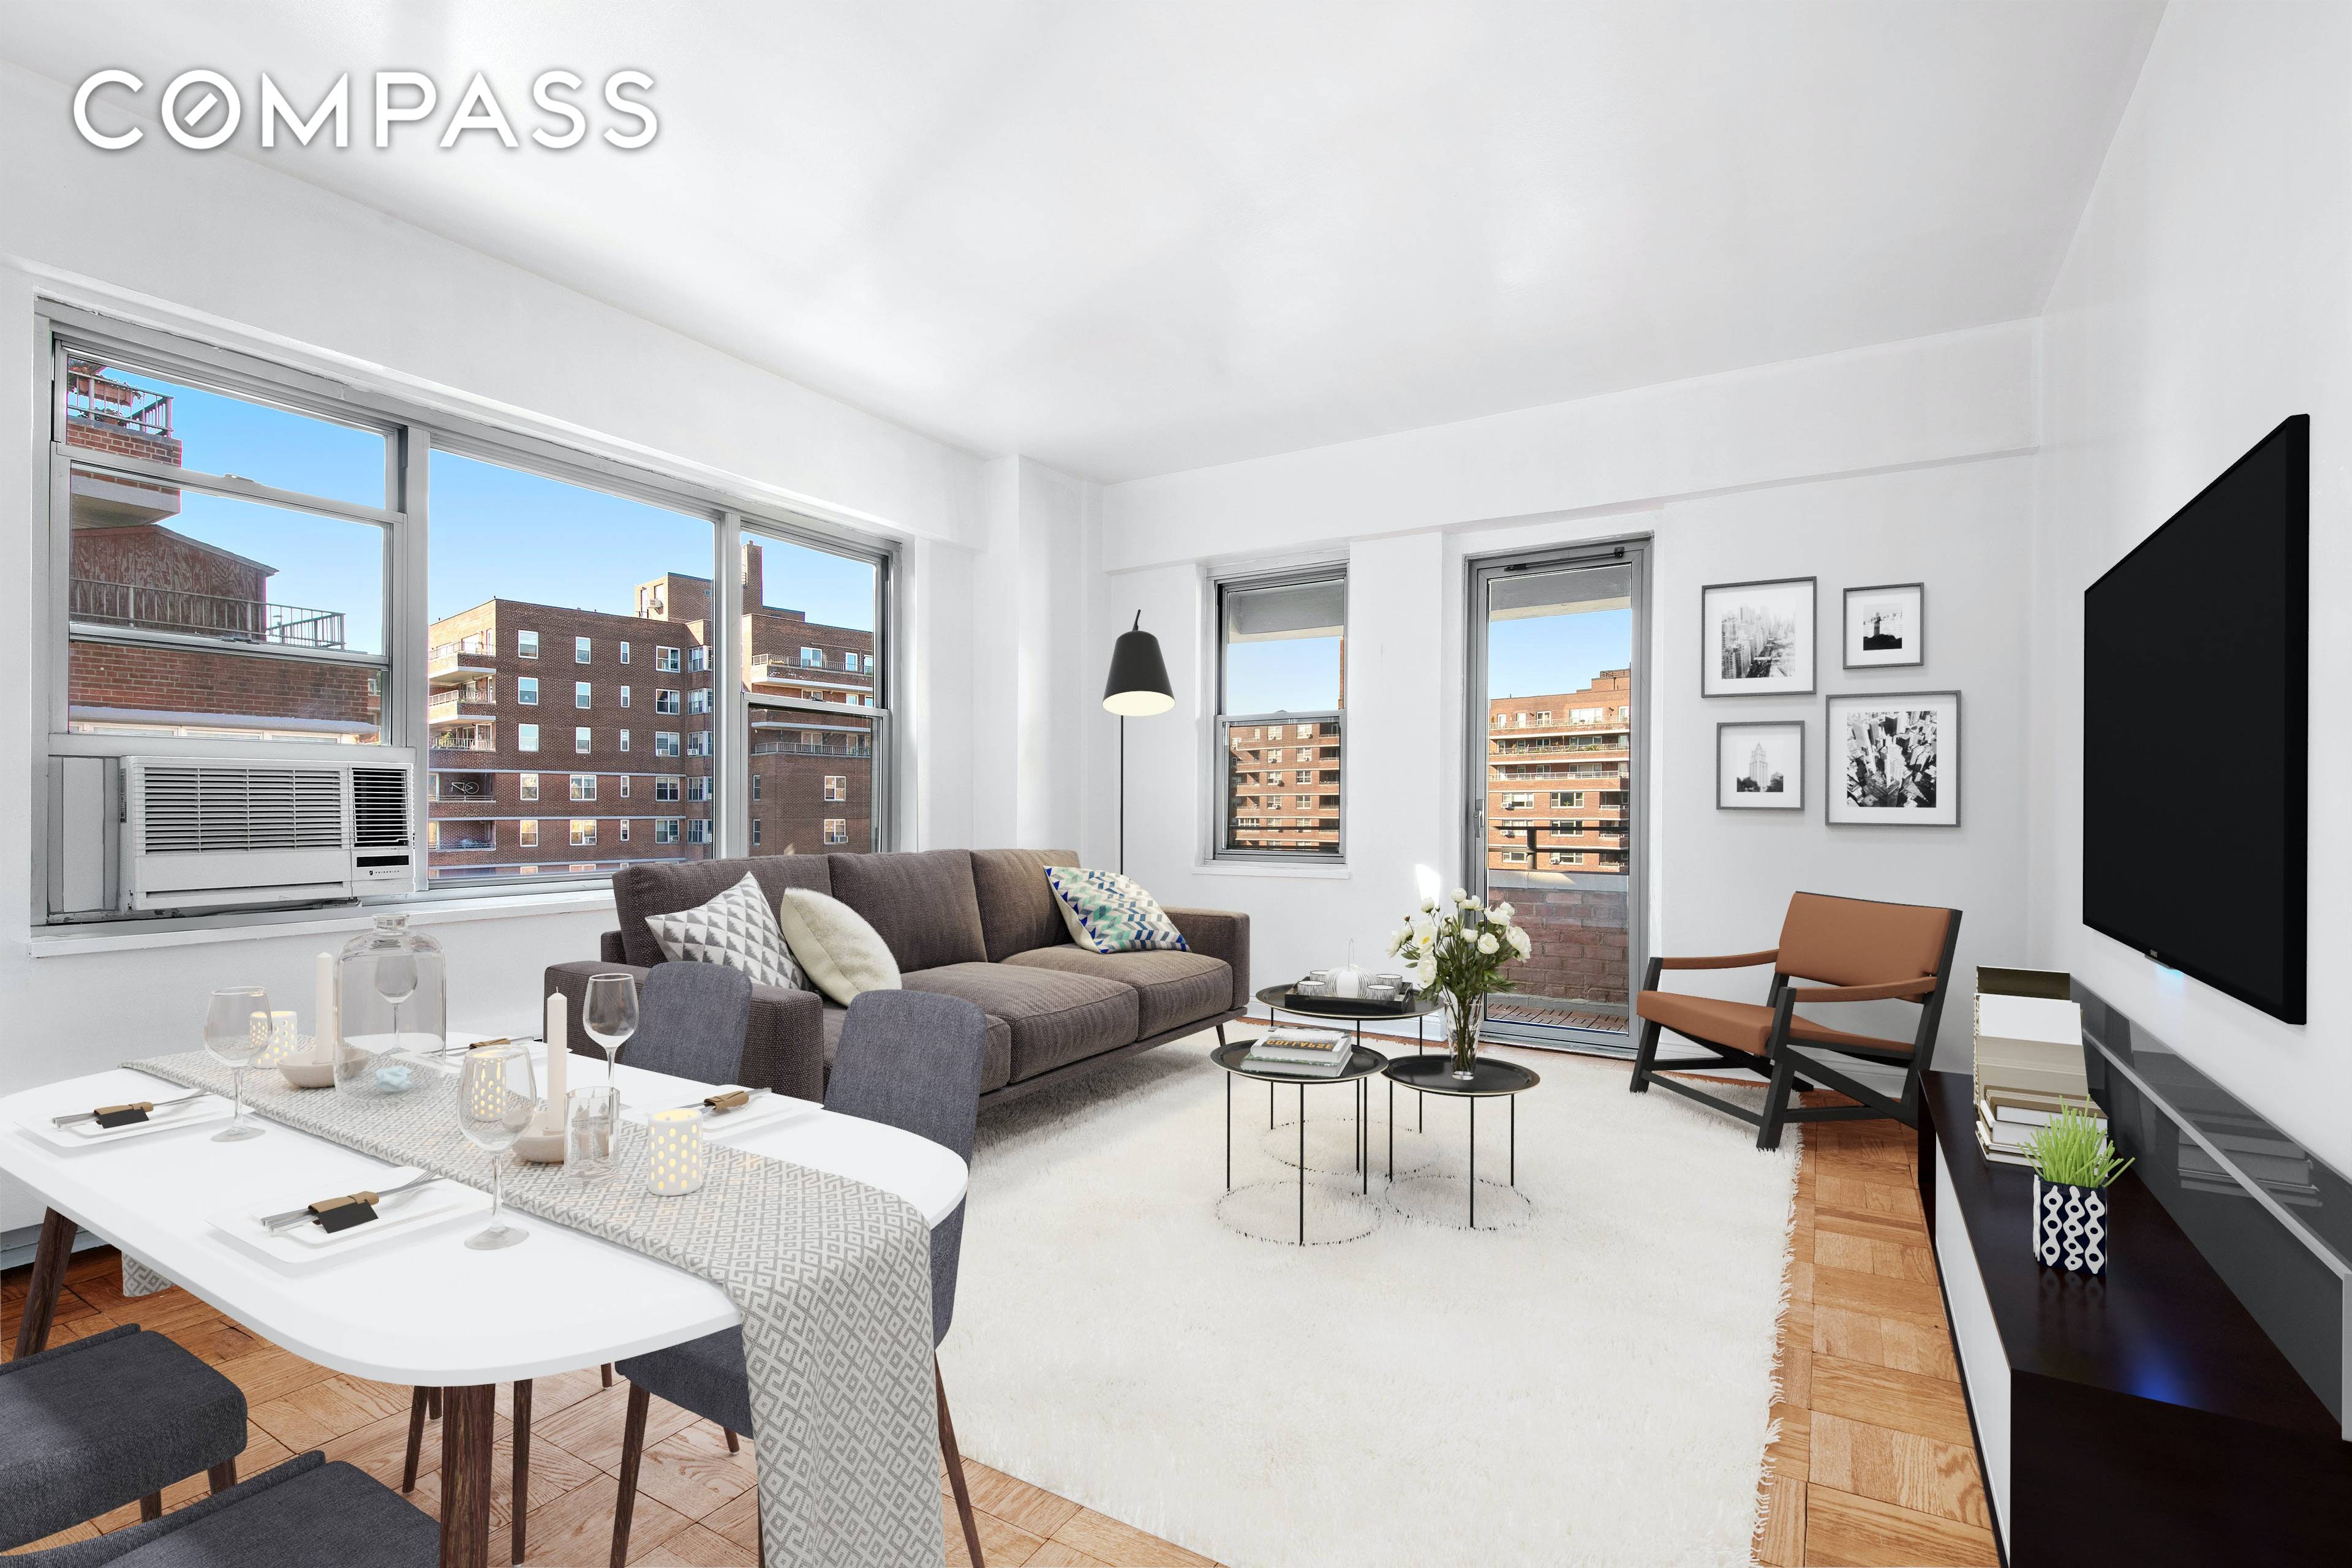 Welcome home to this bright and sunny, large two bedroom apartment at the East River Co ops.